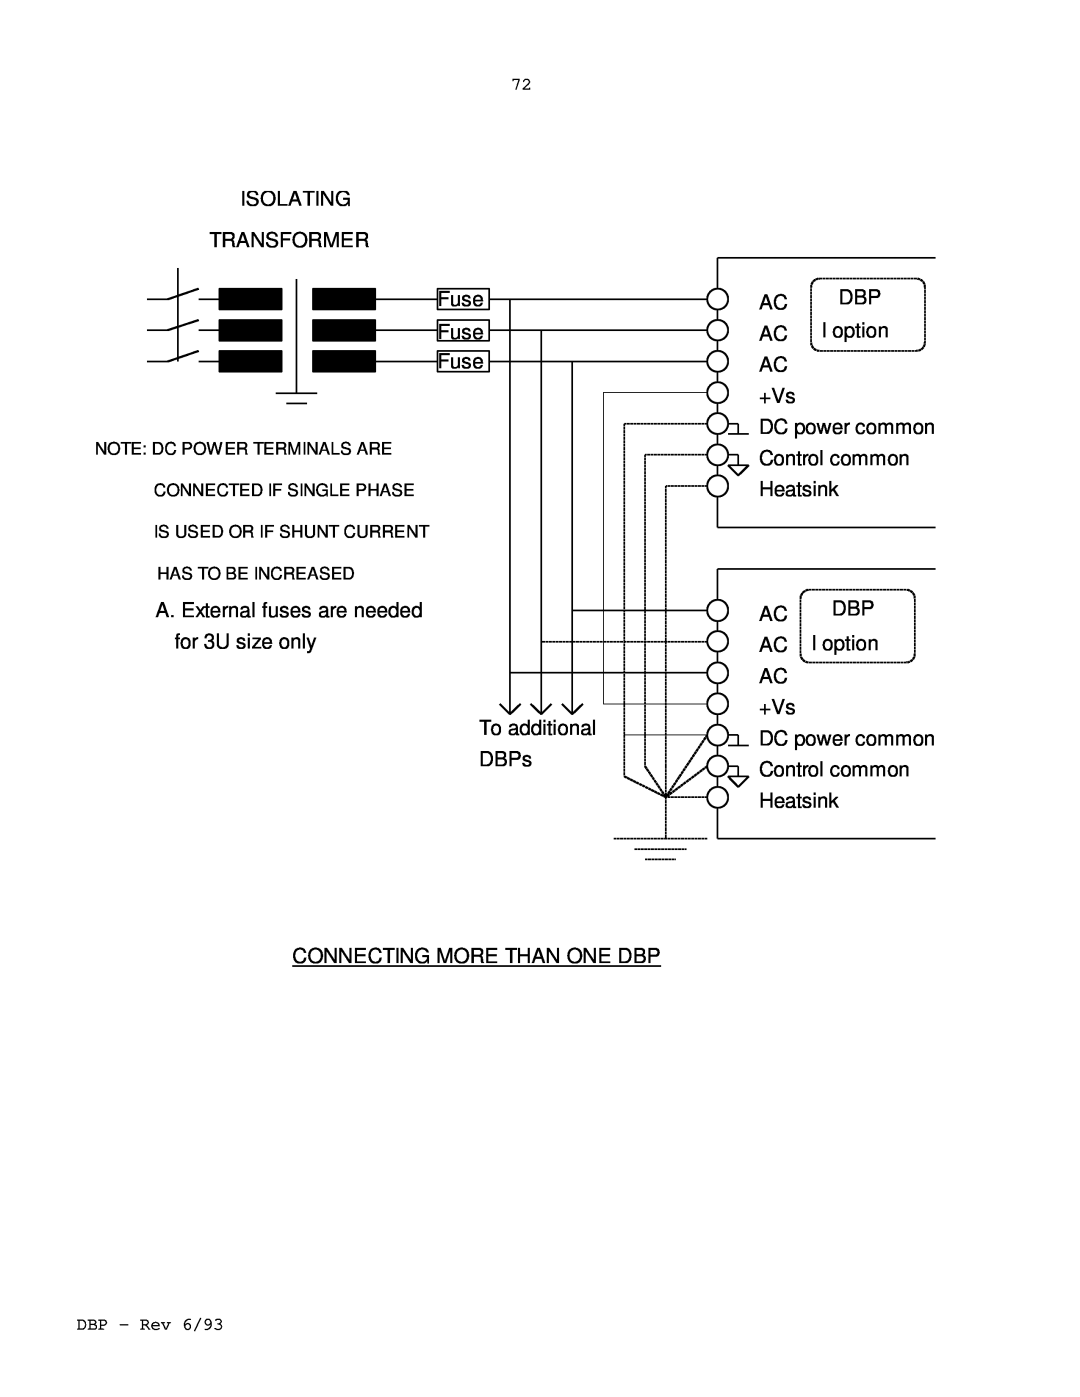 Elmo DBP SERIES ISOLATING TRANSFORMER Fuse Fuse Fuse, A. External fuses are needed for 3U size only, To additional DBPs 